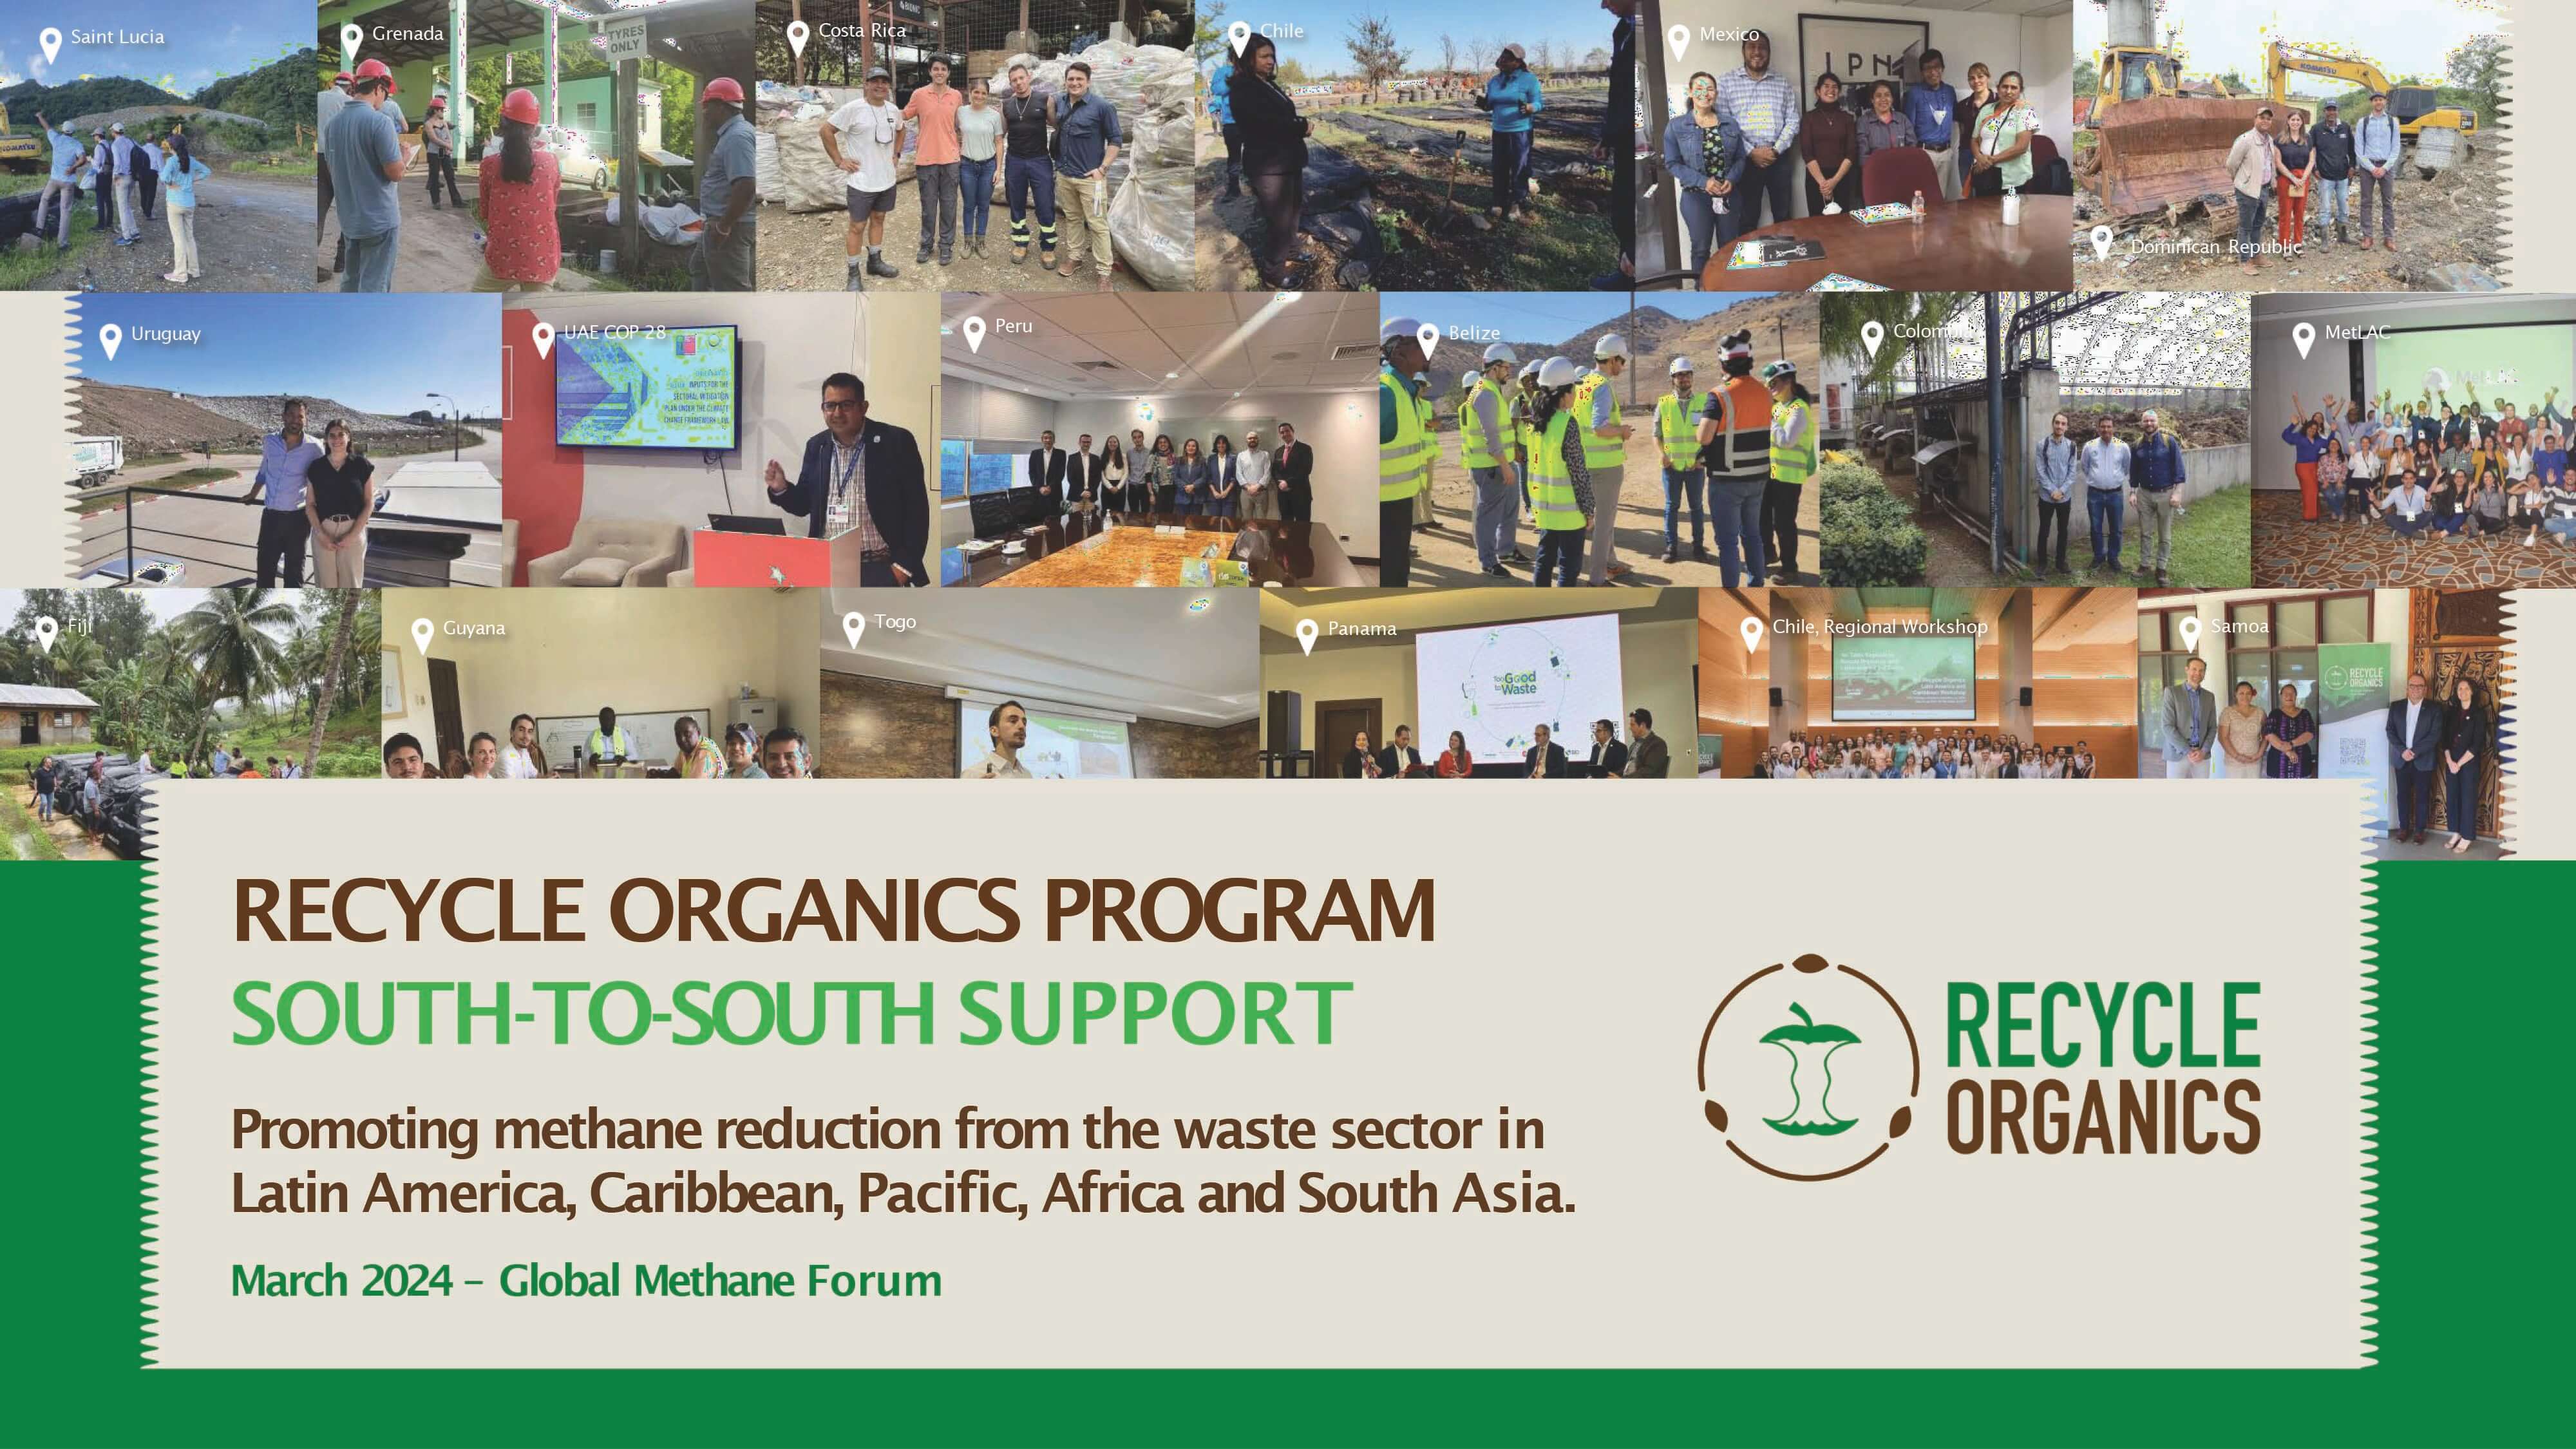 Recycle Organics Program South-to-South Support